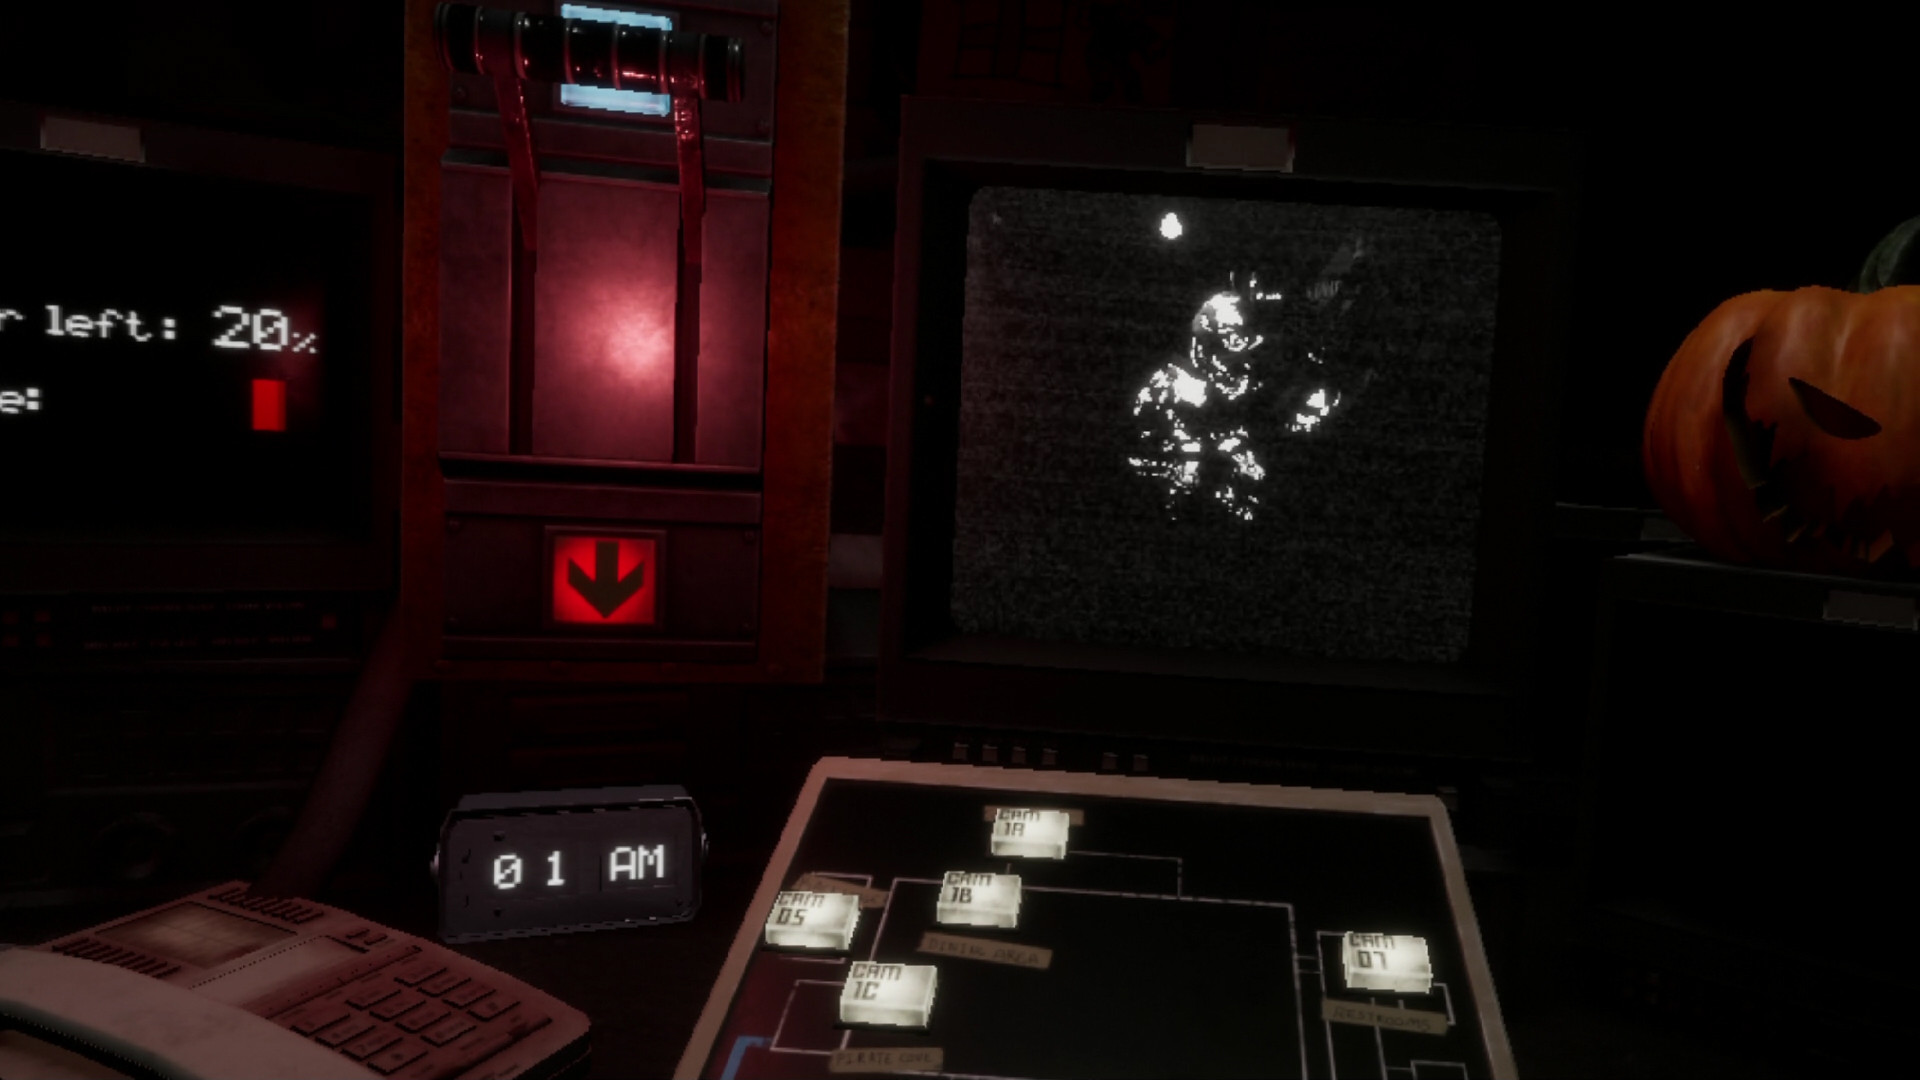 Five Nights at Freddy's: Help Wanted 2 Steam Account